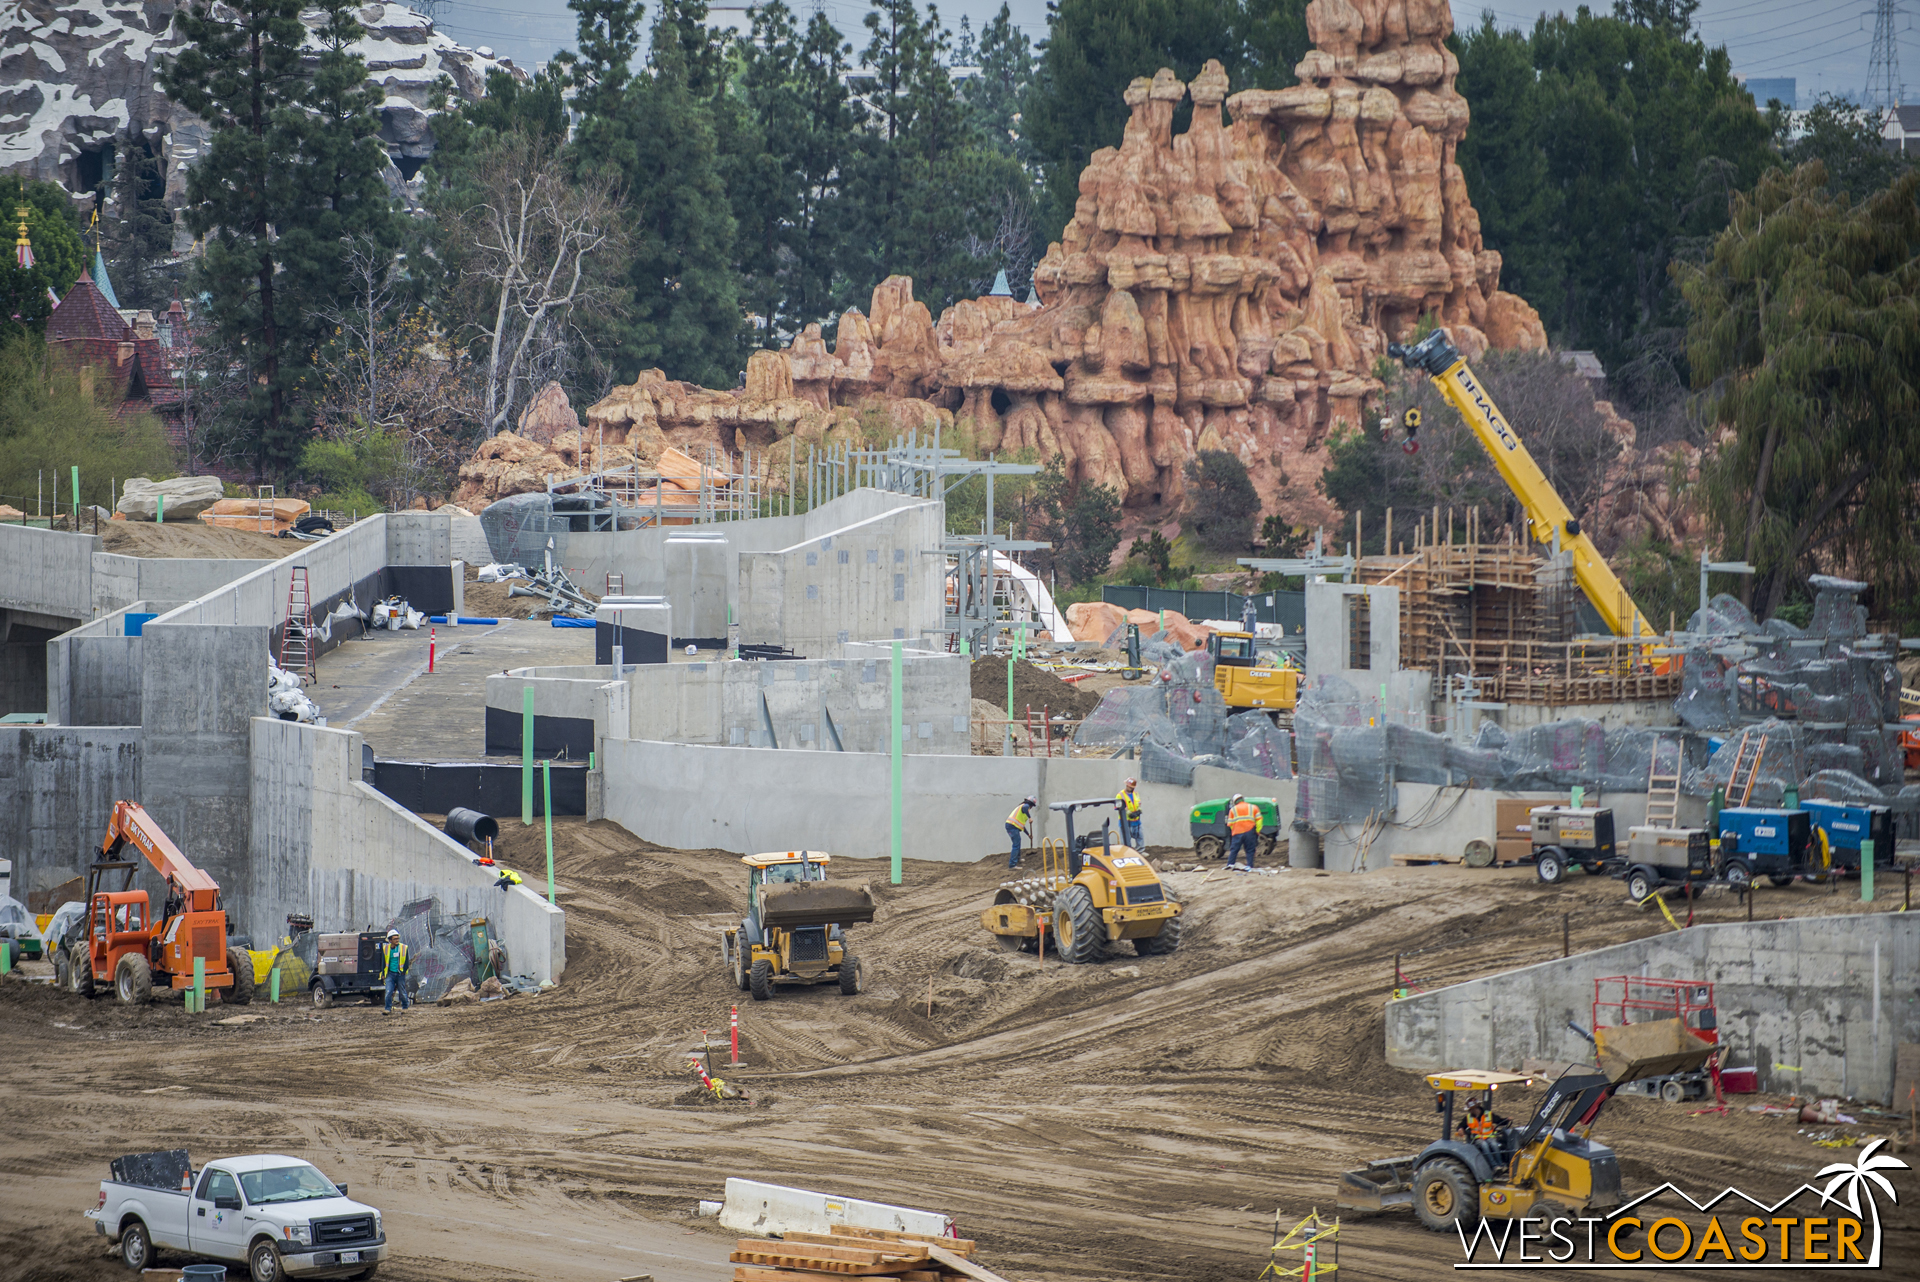  In addition, there looks to be a bit of a bridge over one of the future entry portals of "Star Wars" Land, presumably to provide service access and connect from backstage of Fantasyland/Frontierland.&nbsp; This looks similar to a  service crossing a